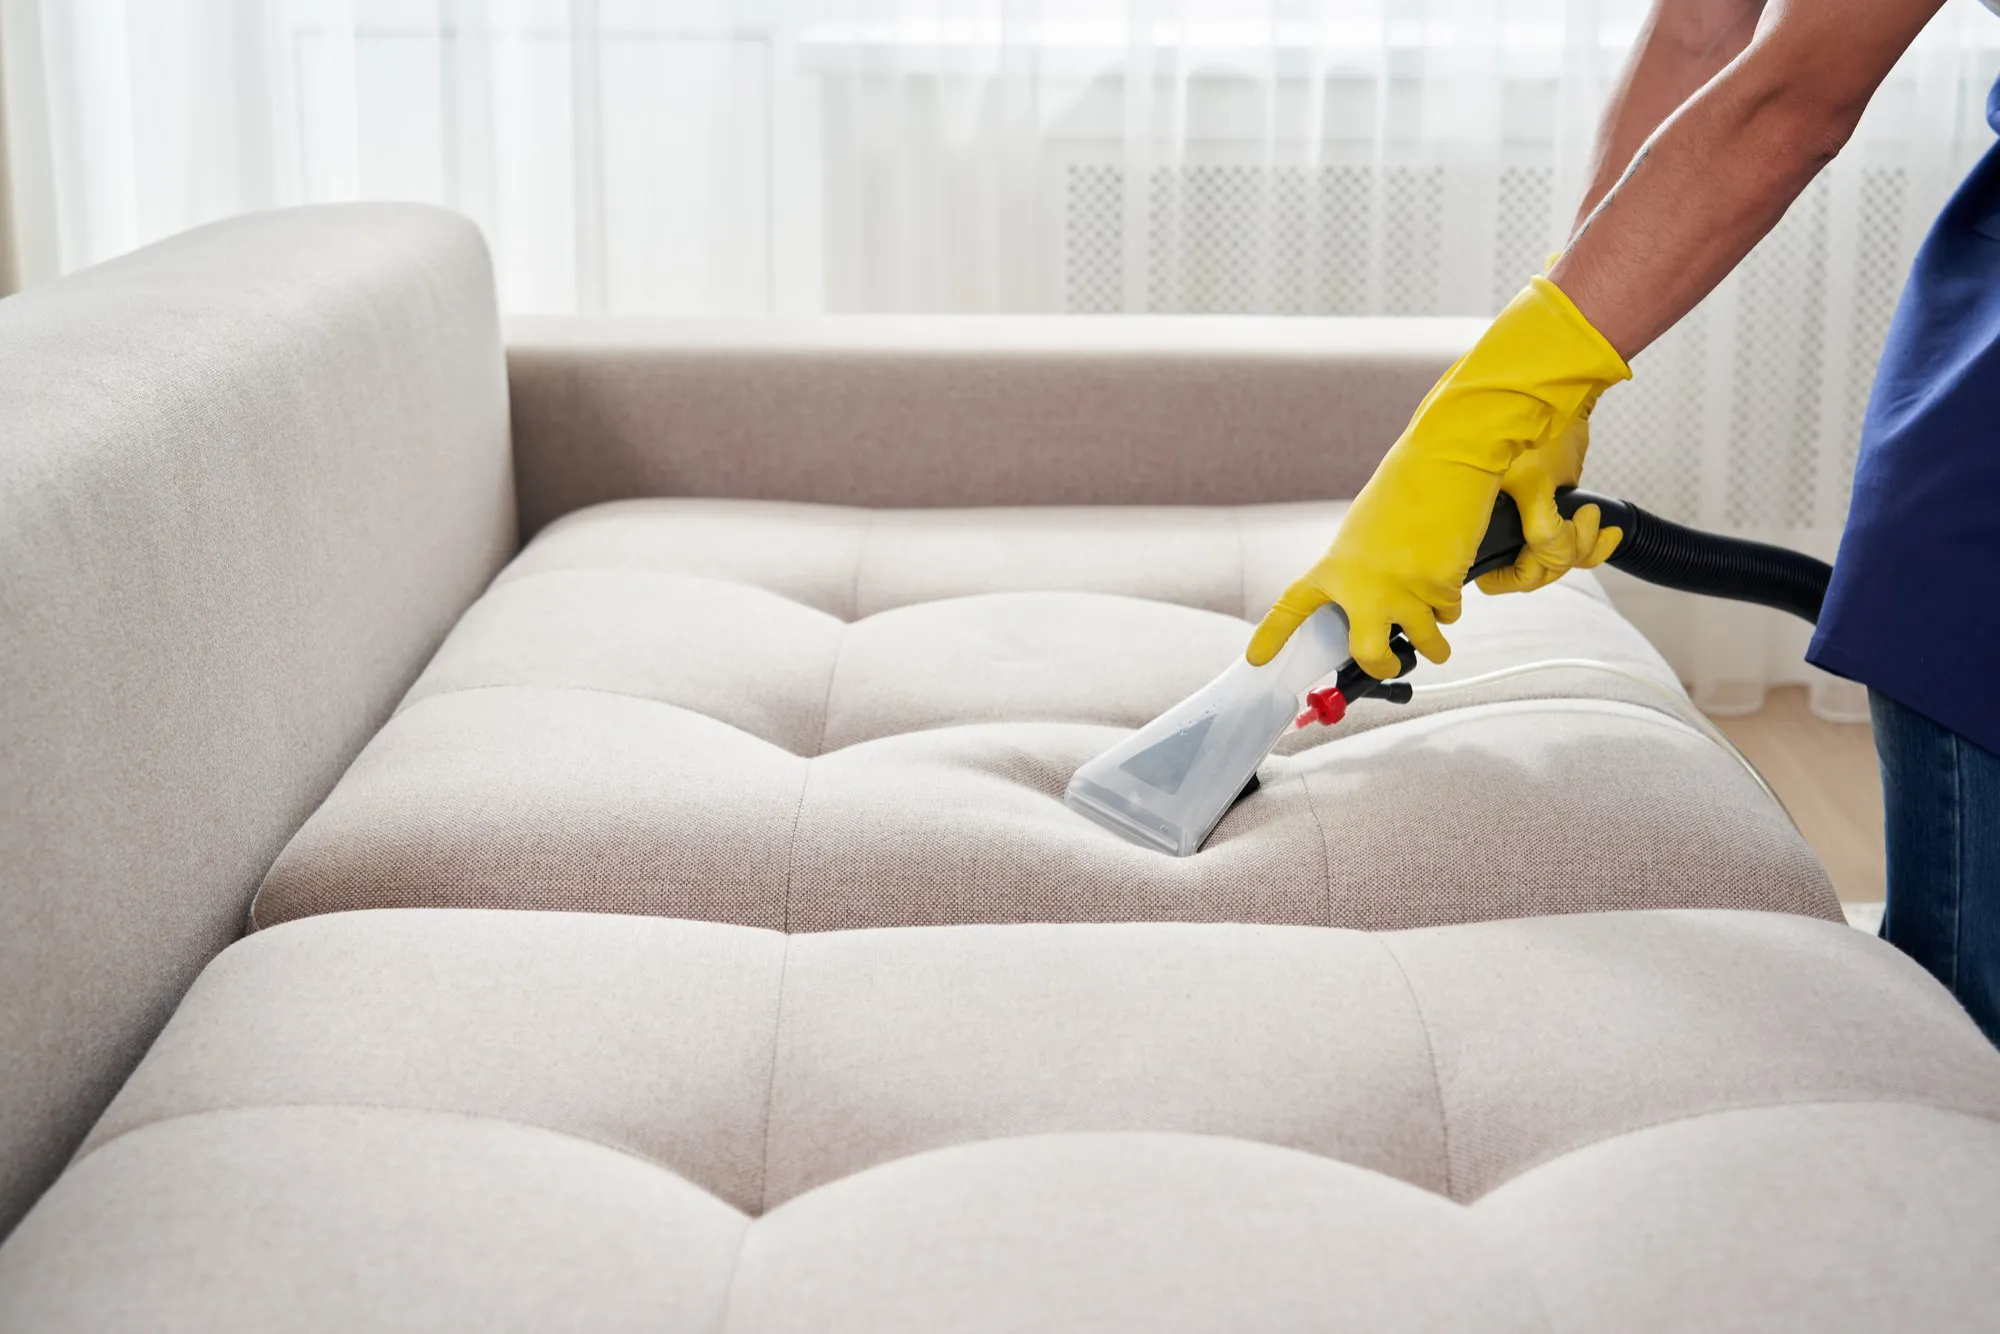 upholstery cleaning technicians